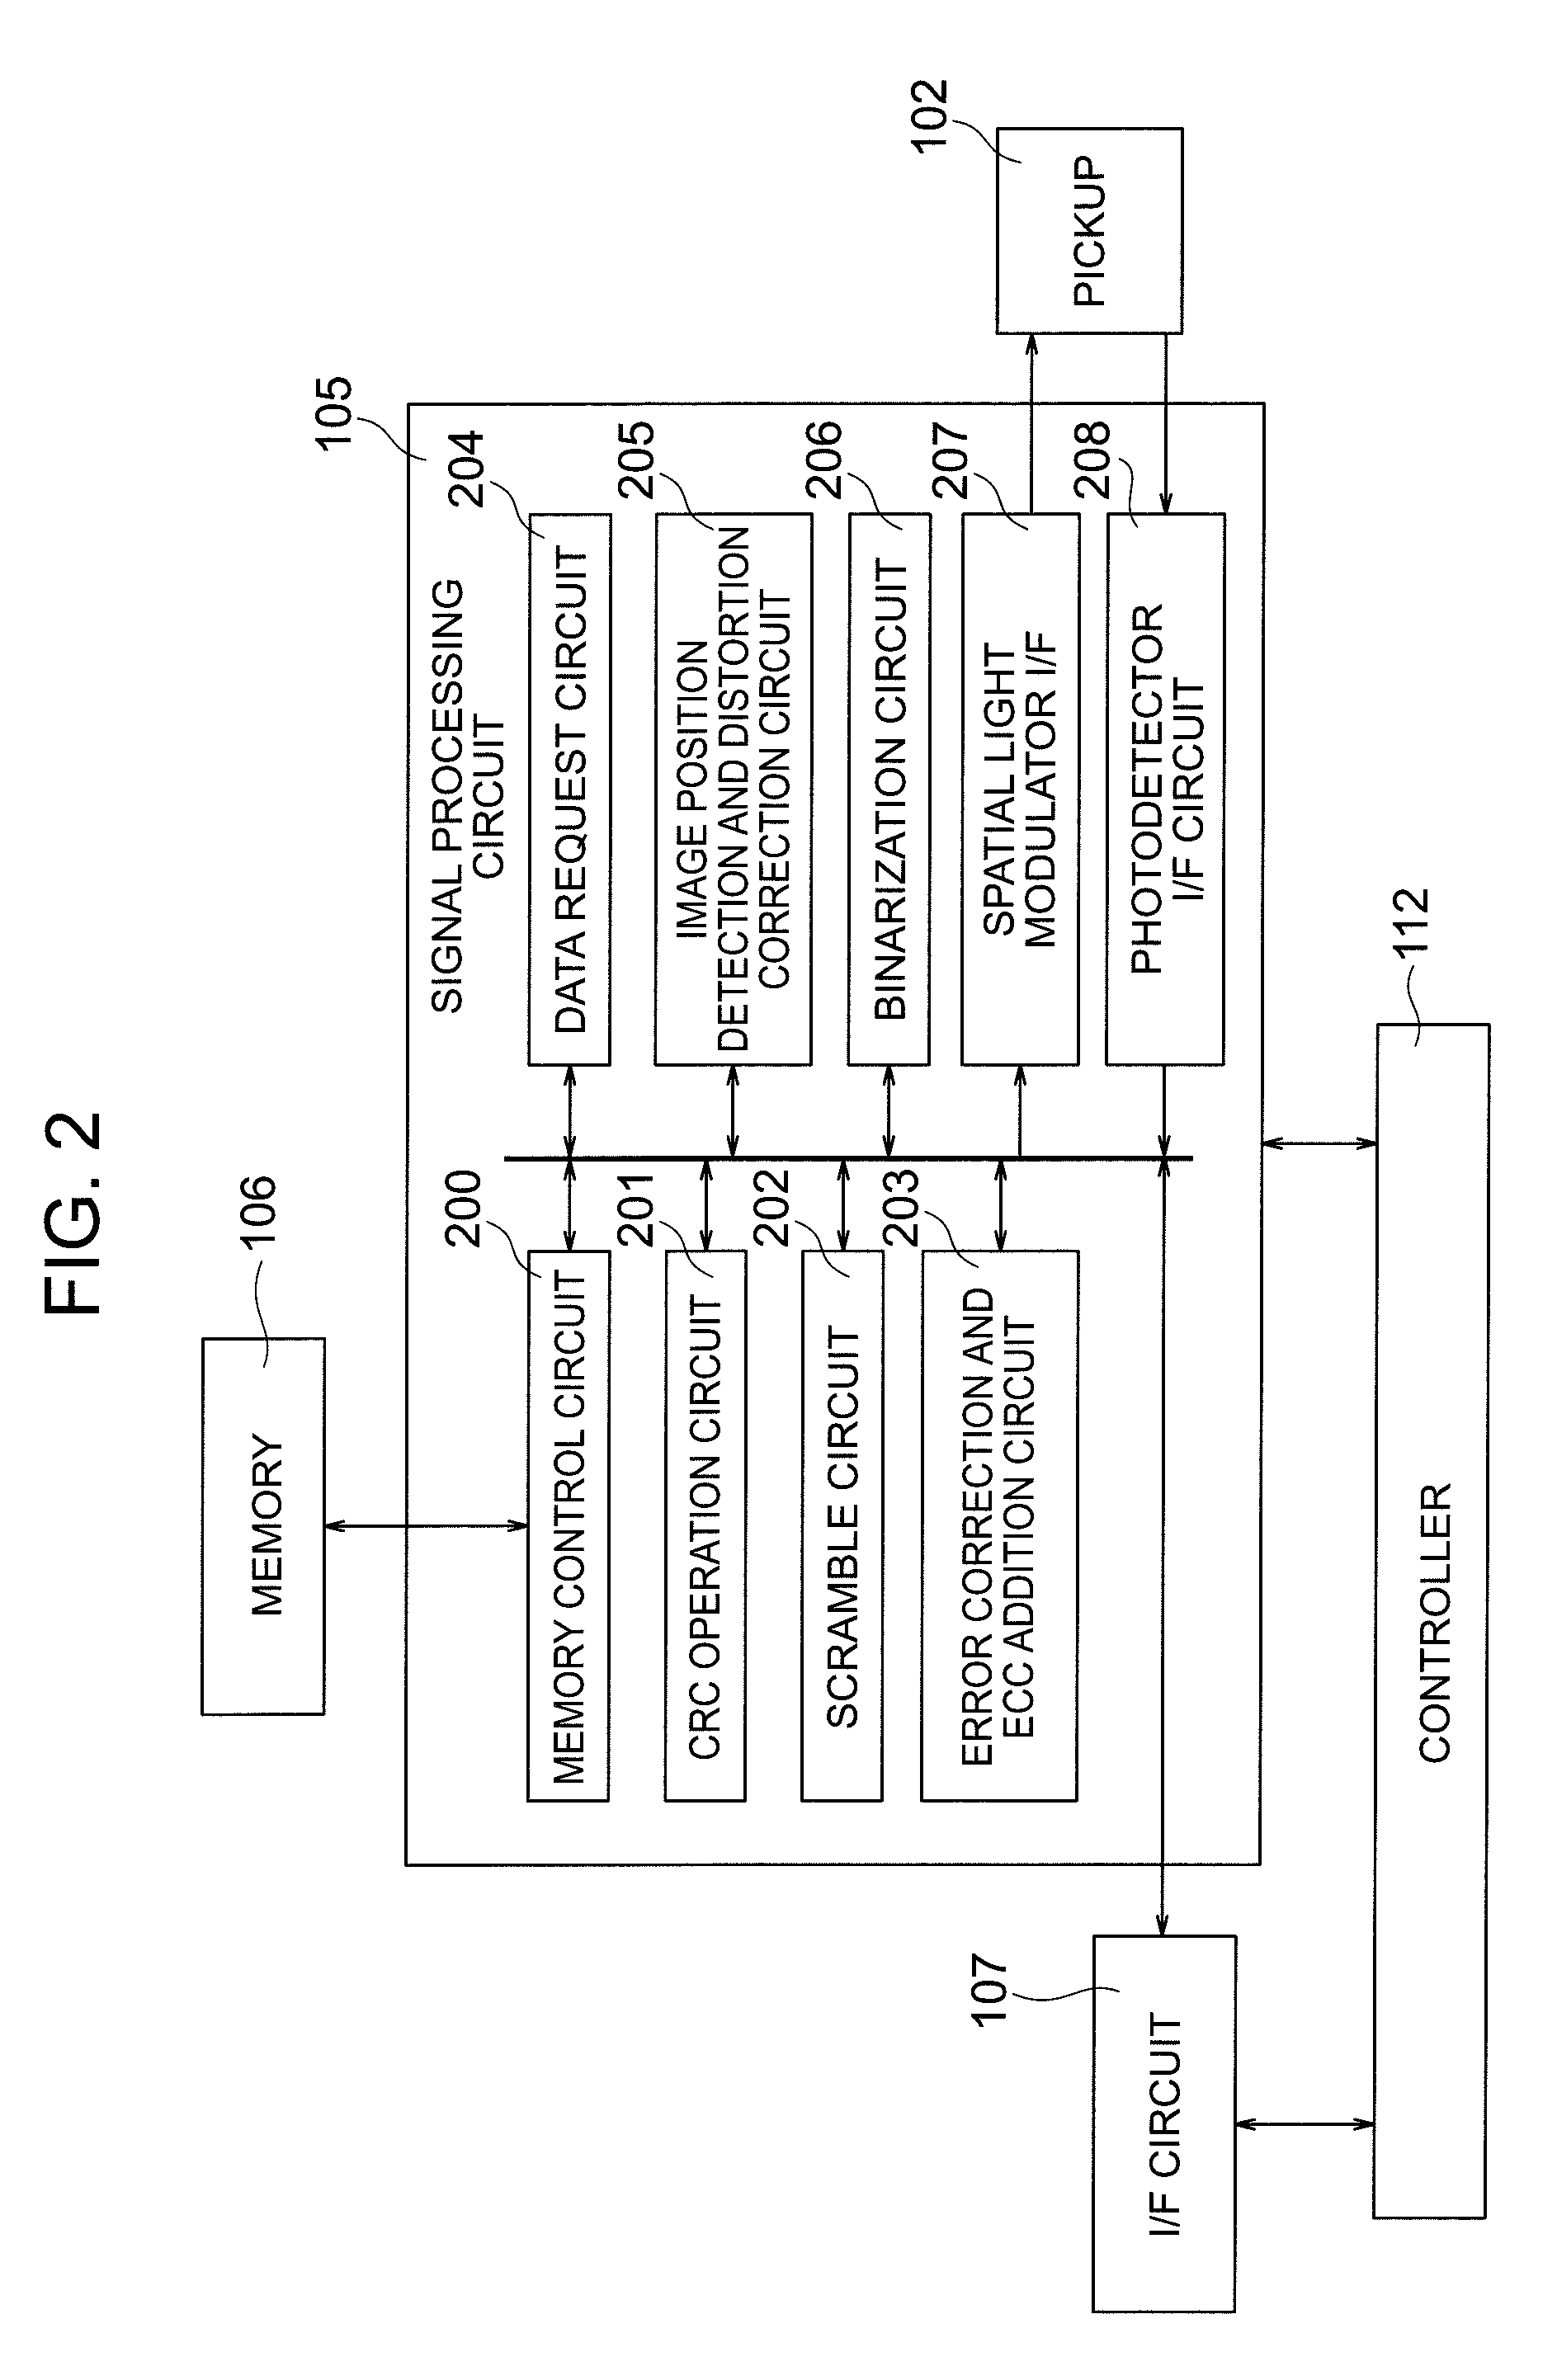 Optical information recording and reproducing apparatus, optical information recording and reproducing method, and data library apparatus